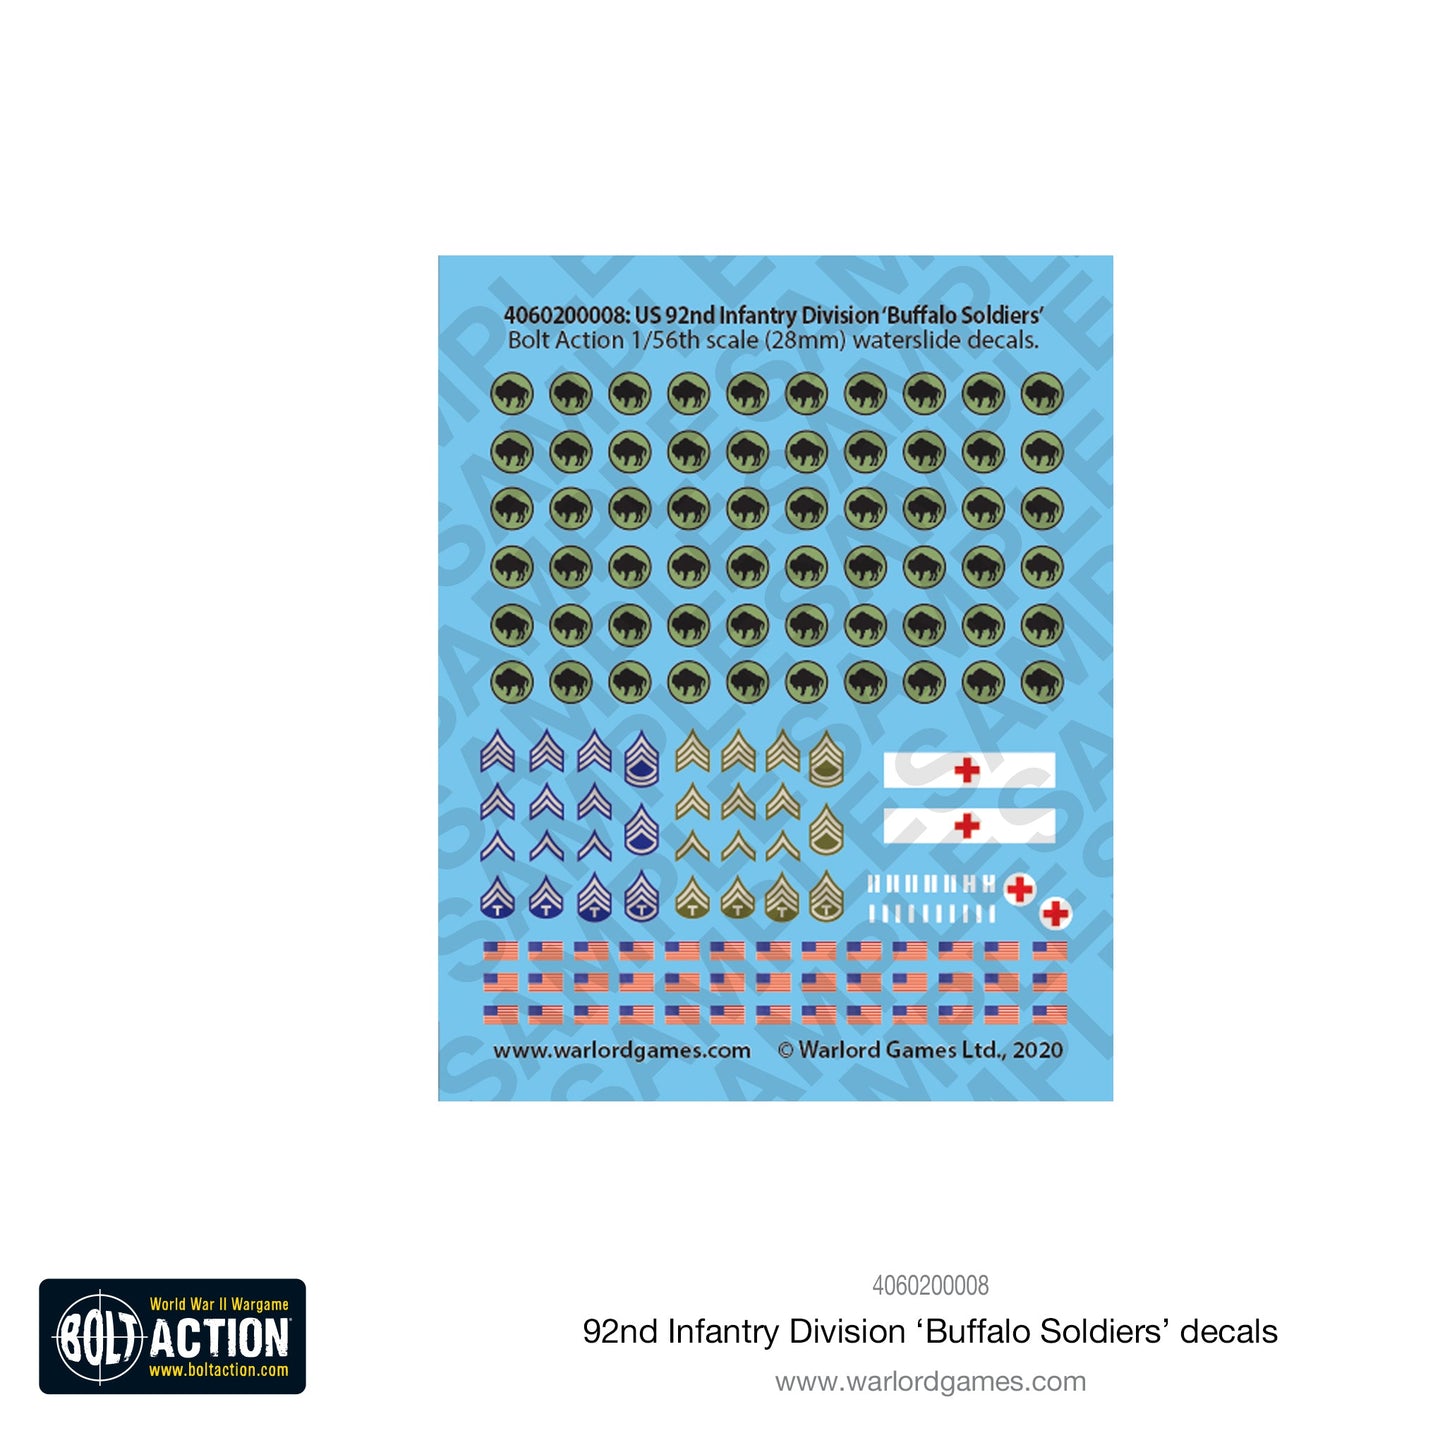 US 92nd Infantry Division (Buffalo Soldiers) - Bolt Action Decal